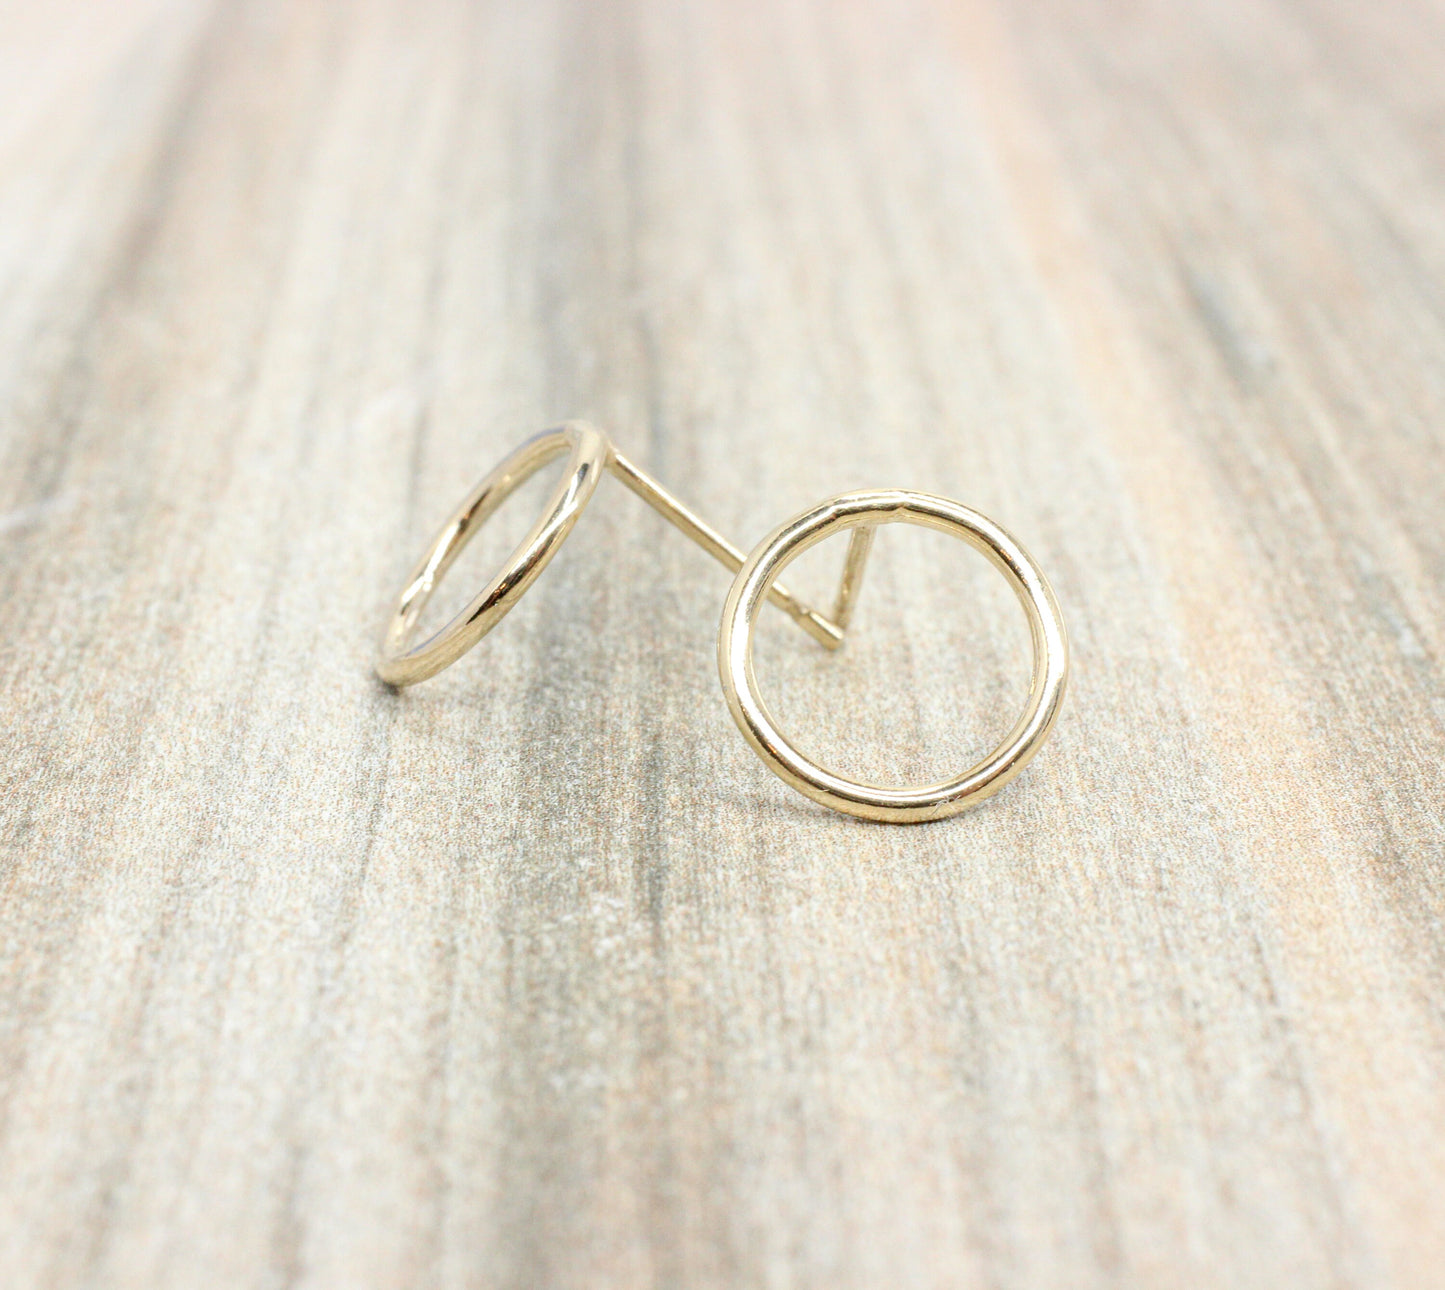 Gold Circle Stud Earrings // 14k Gold Filled Open Circle Studs // 10mm Simple Gold Studs